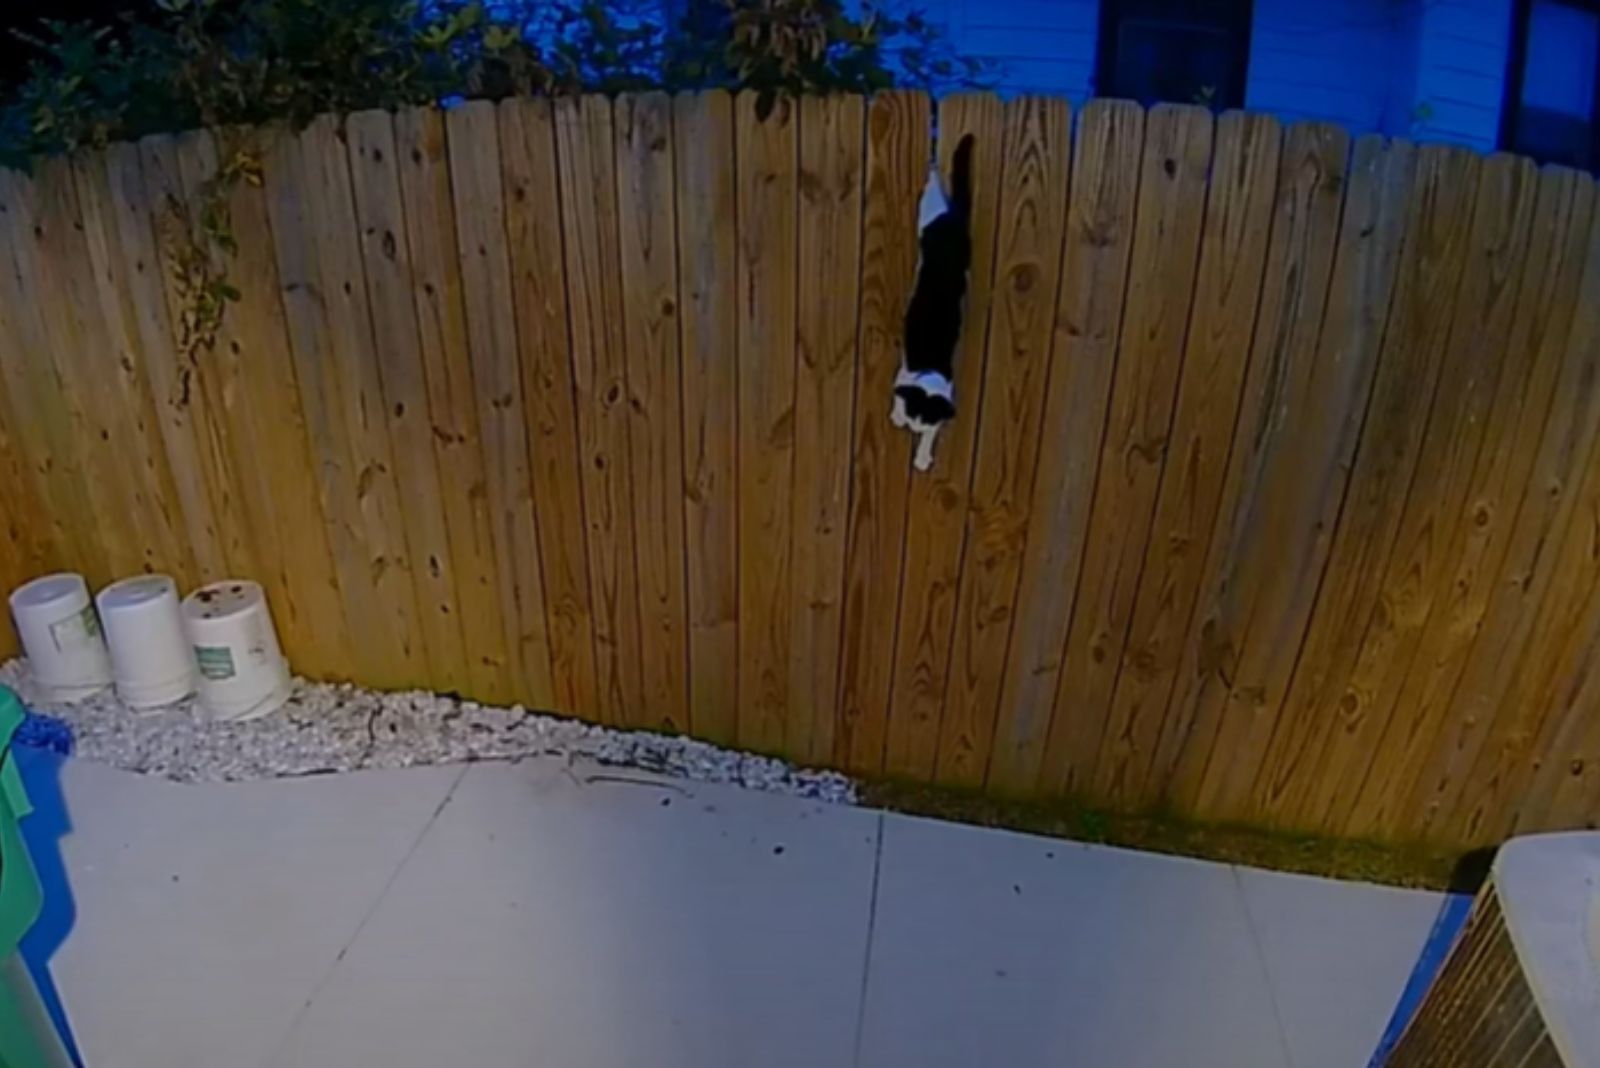 a cat on fence